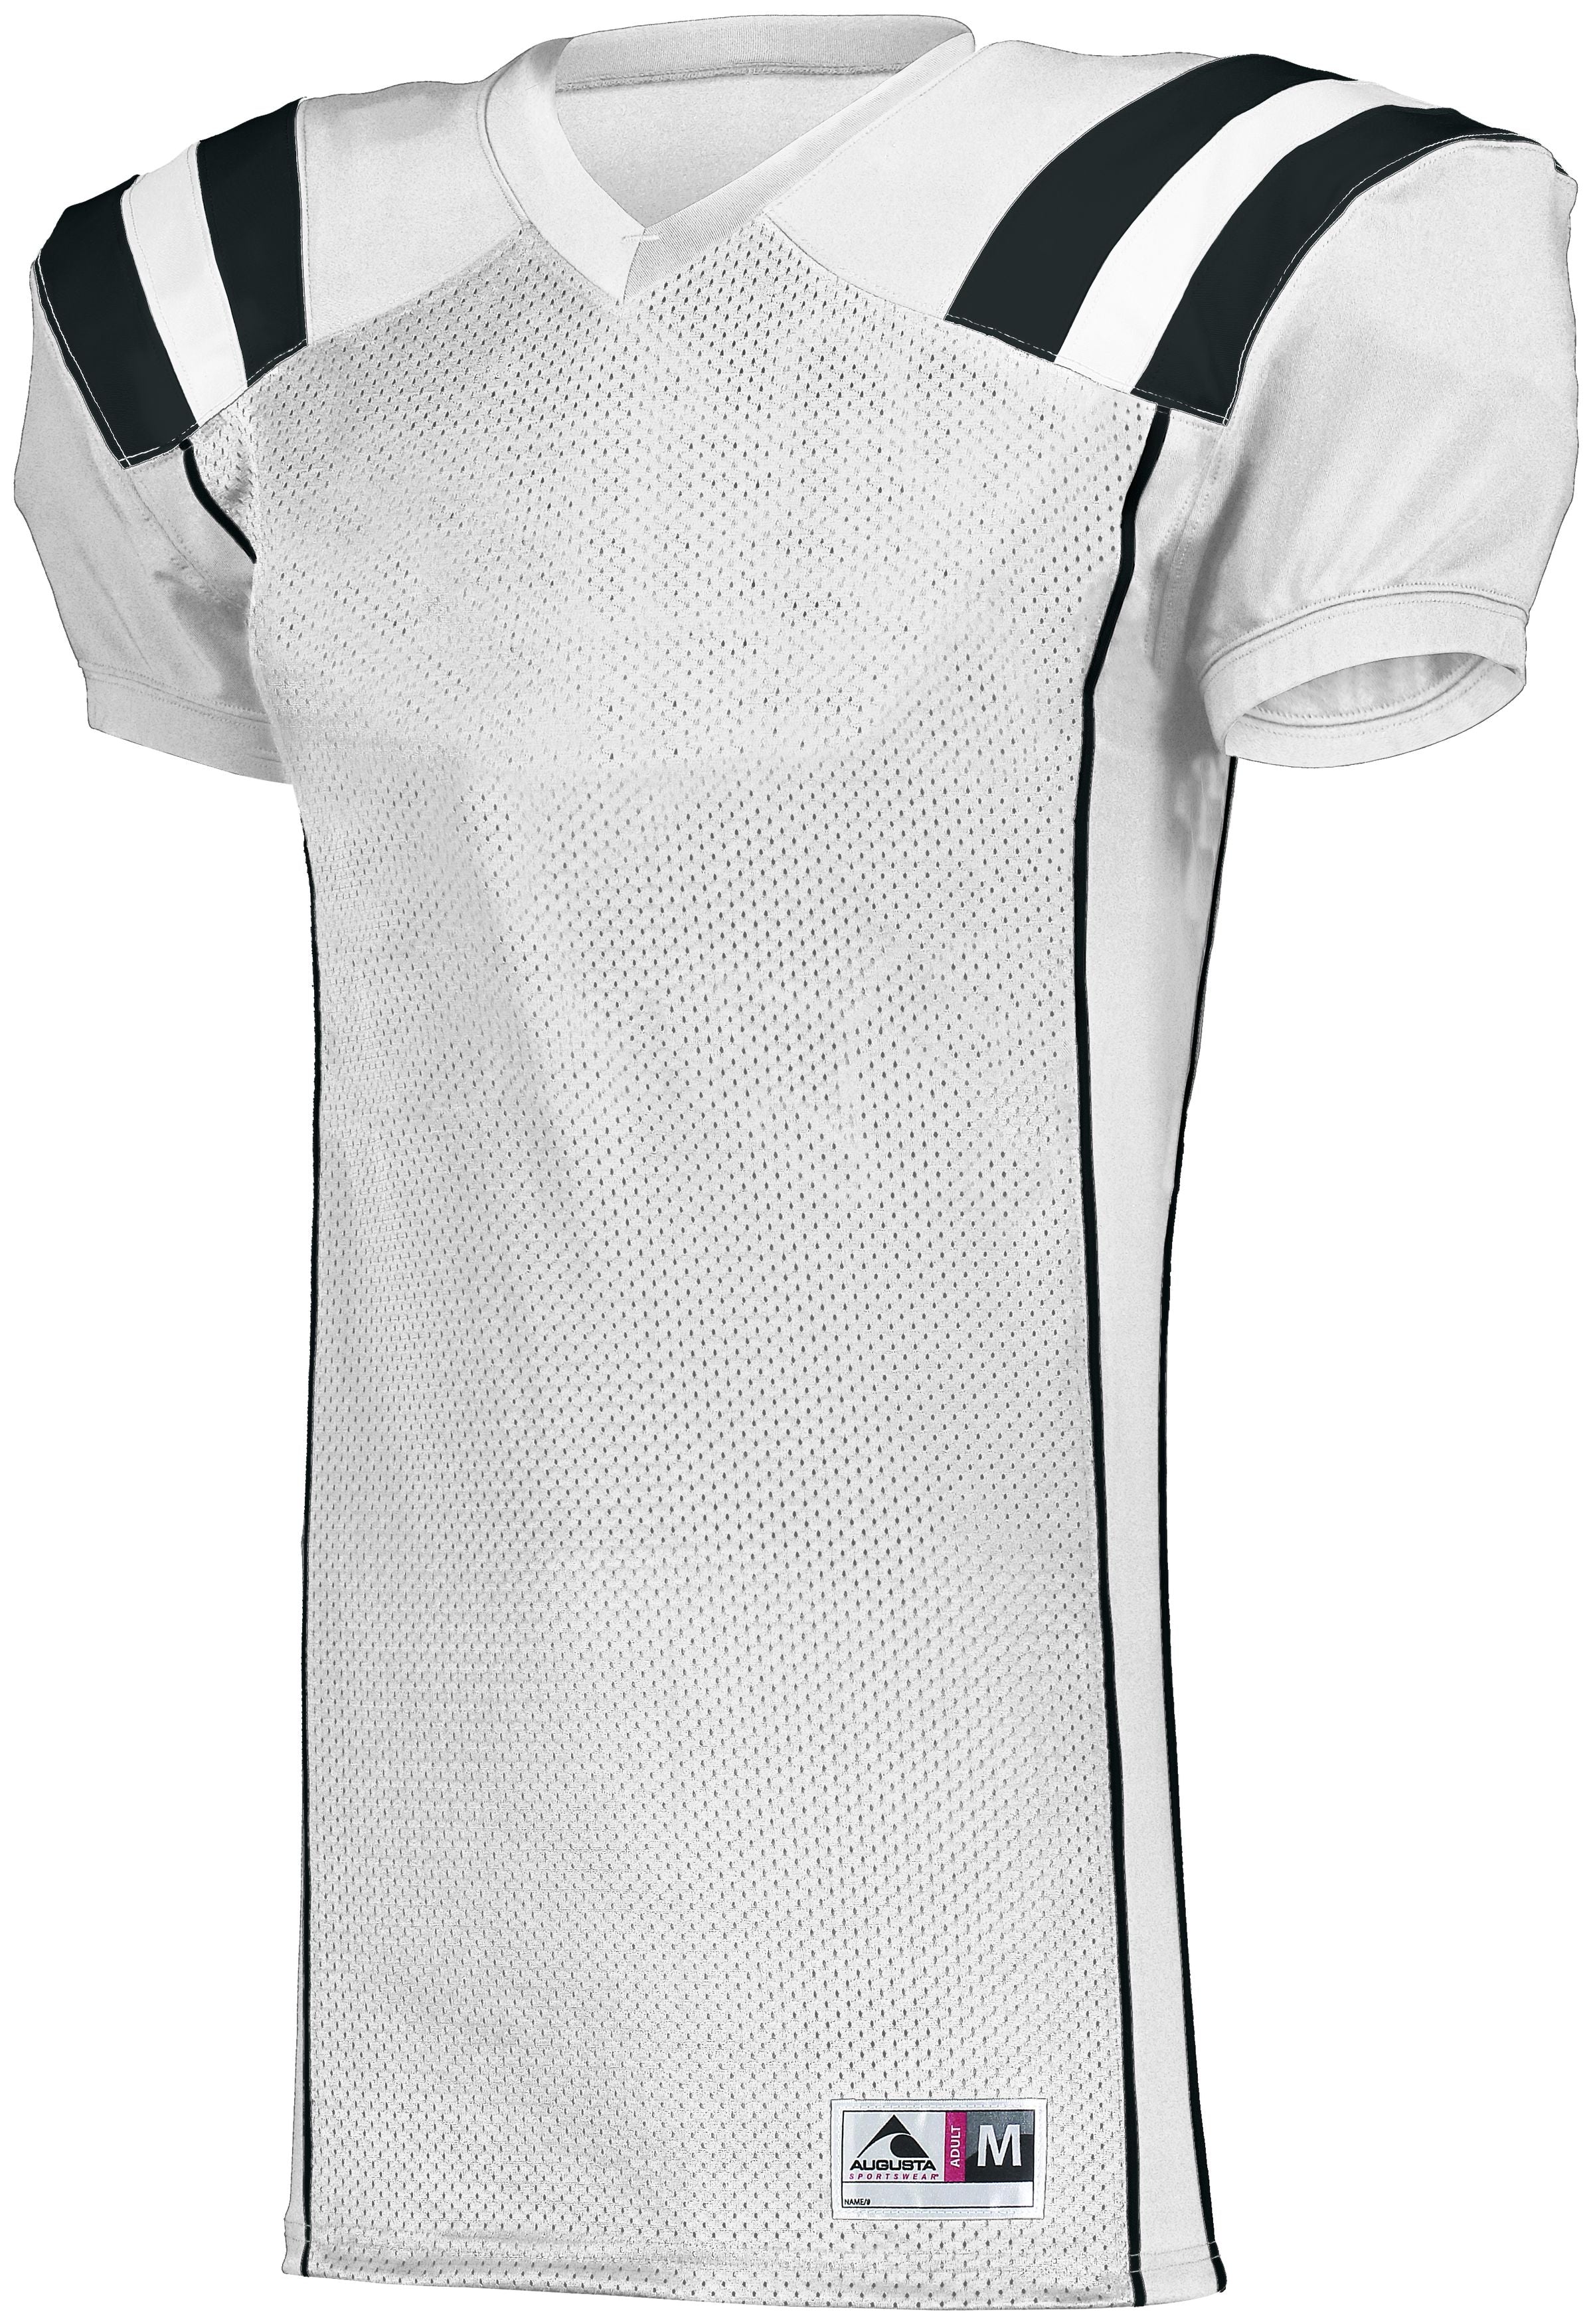 Augusta Sportswear Youth Tform Football Jersey in White/Black  -Part of the Youth, Youth-Jersey, Augusta-Products, Football, Shirts, All-Sports, All-Sports-1 product lines at KanaleyCreations.com